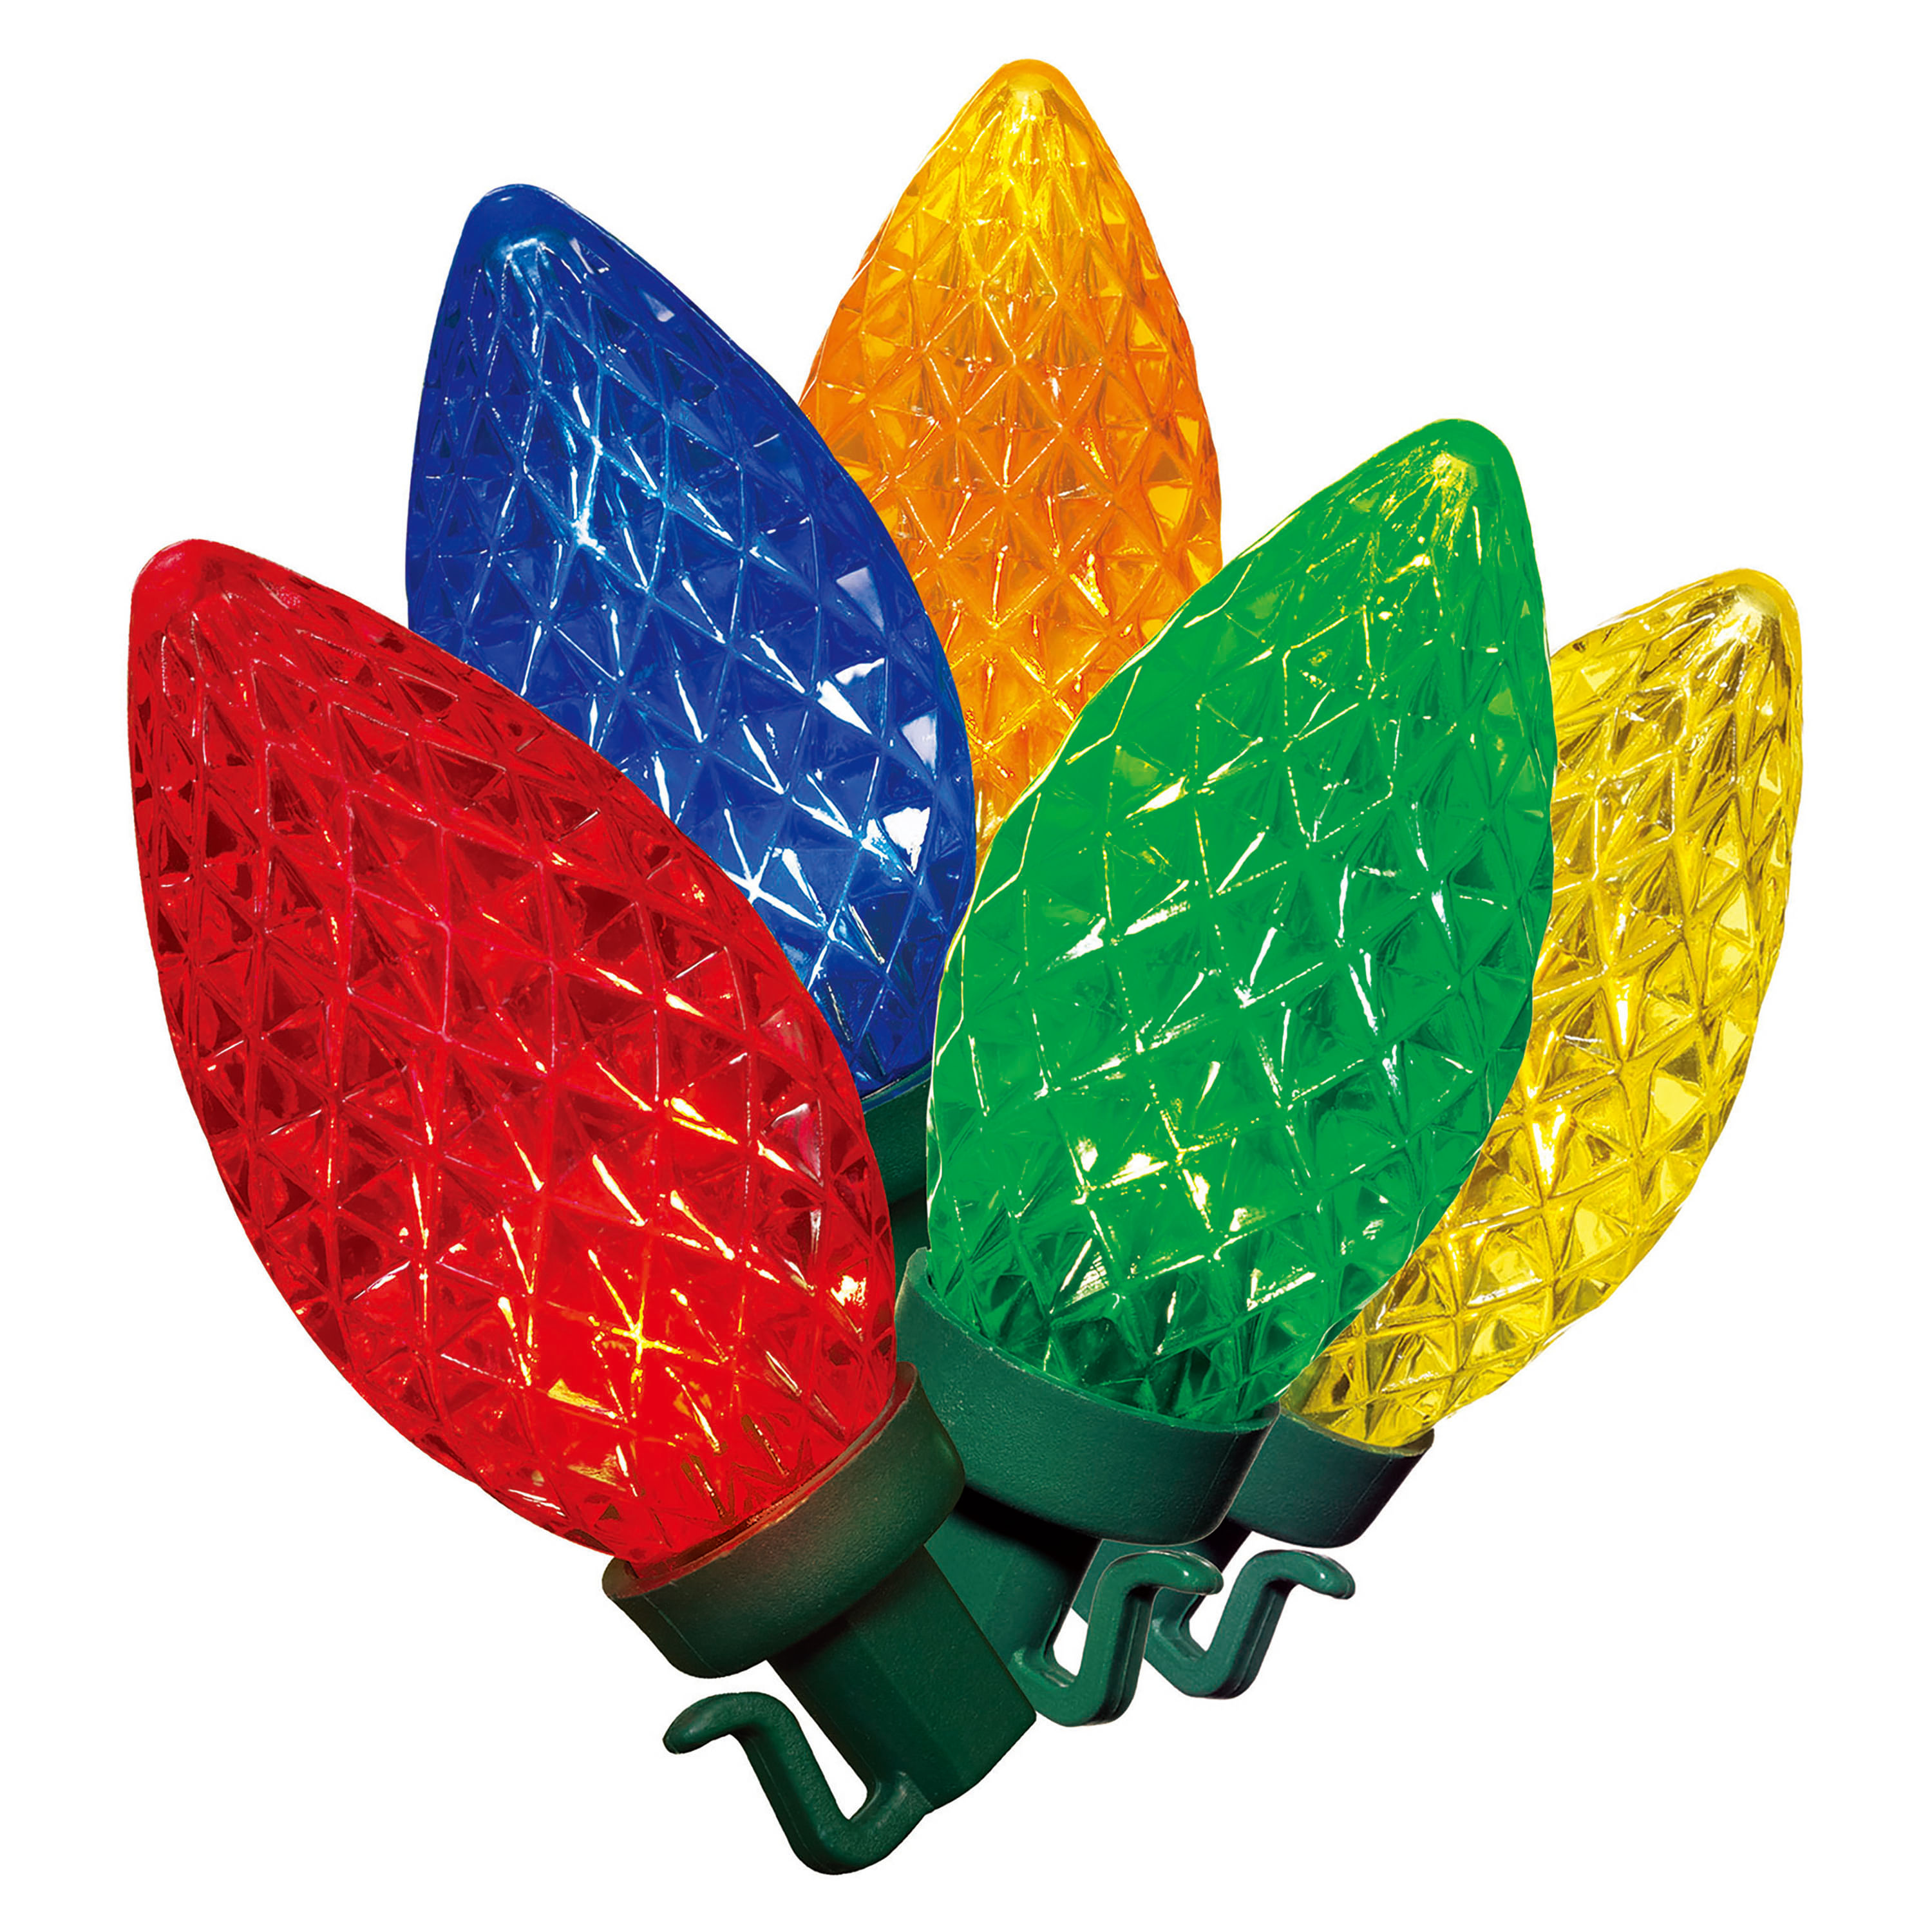 Serie-100-Luces-Led-Marca-Holiday-Time-Multicolor-S-per-Brillante-17-8mts-1-16710